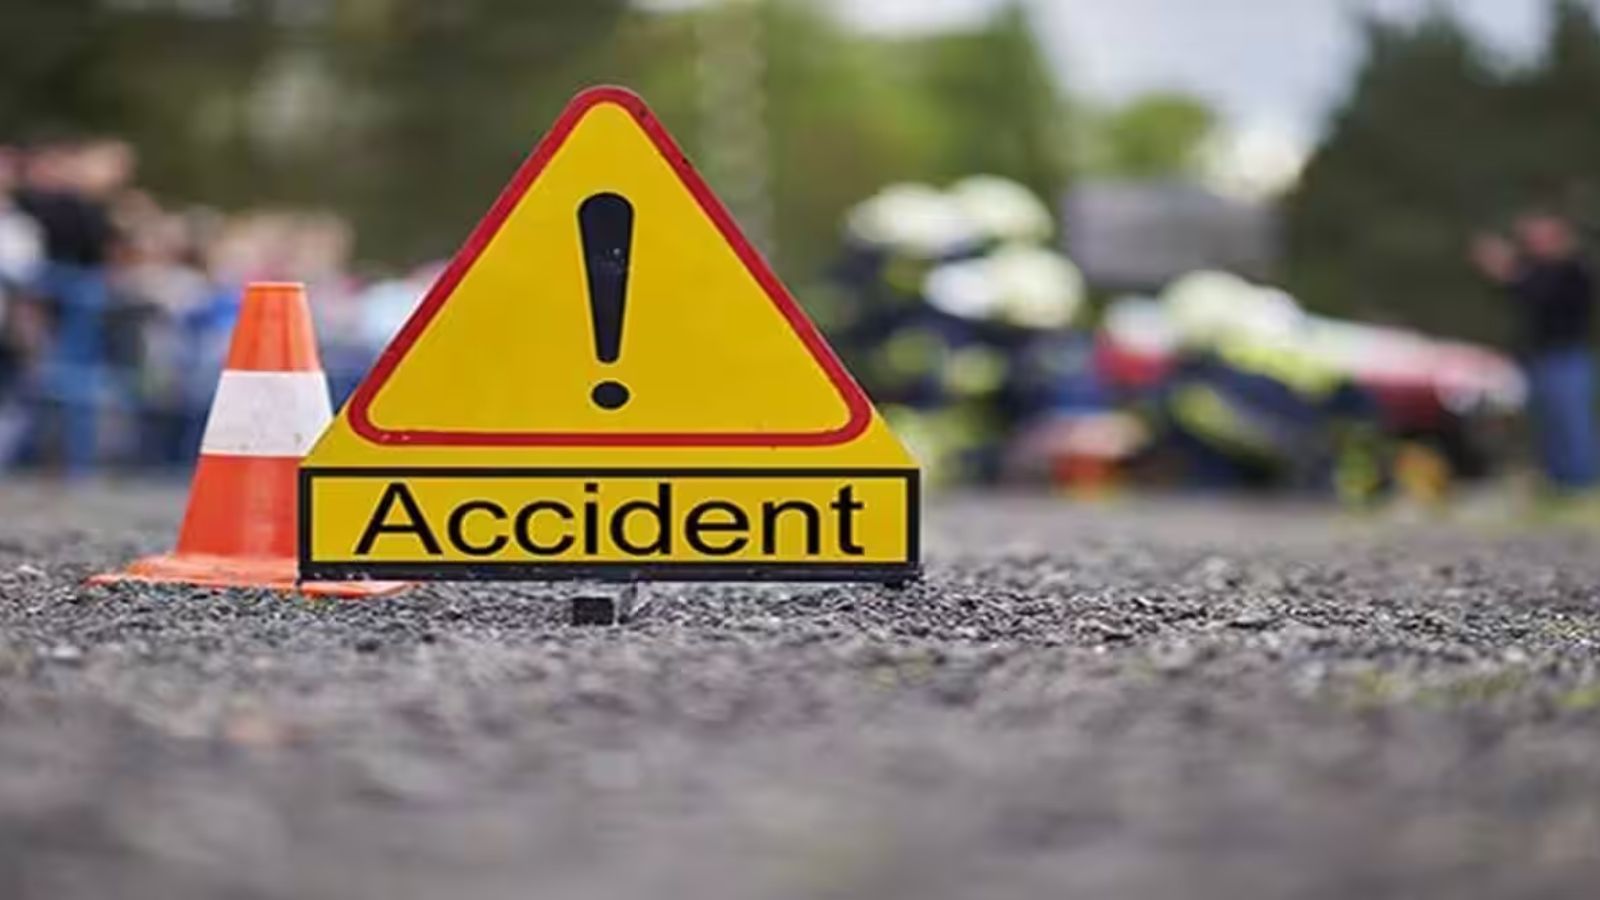 Purvanchal Expressway Accident: 8 killed as double-decker buses collide on  Purvanchal Expressway - The Economic Times